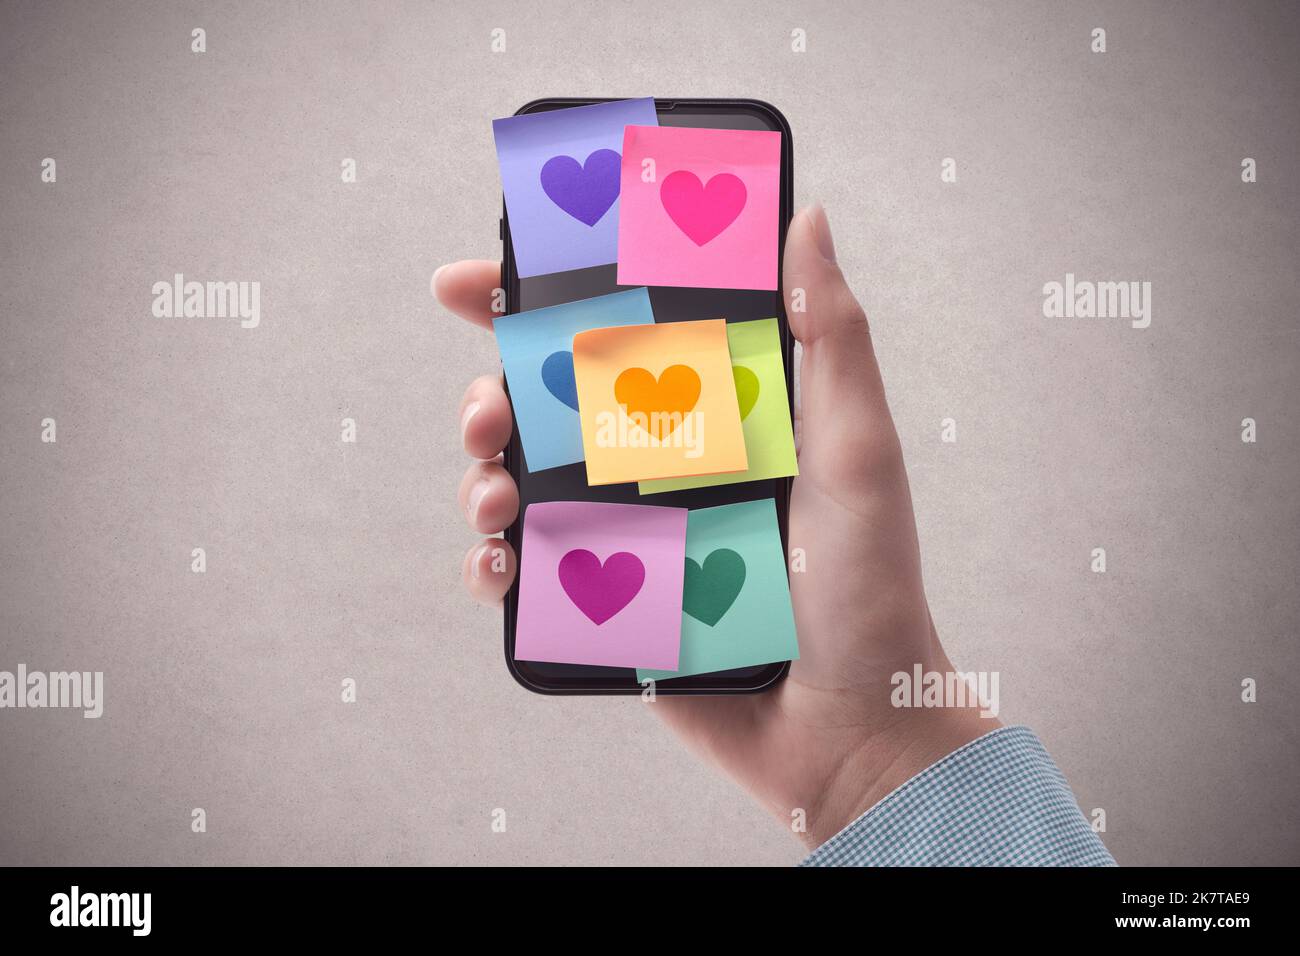 Woman holding a smartphone and lots of sticky notes with hearts on the display, relationships and communication concept, POV shot Stock Photo